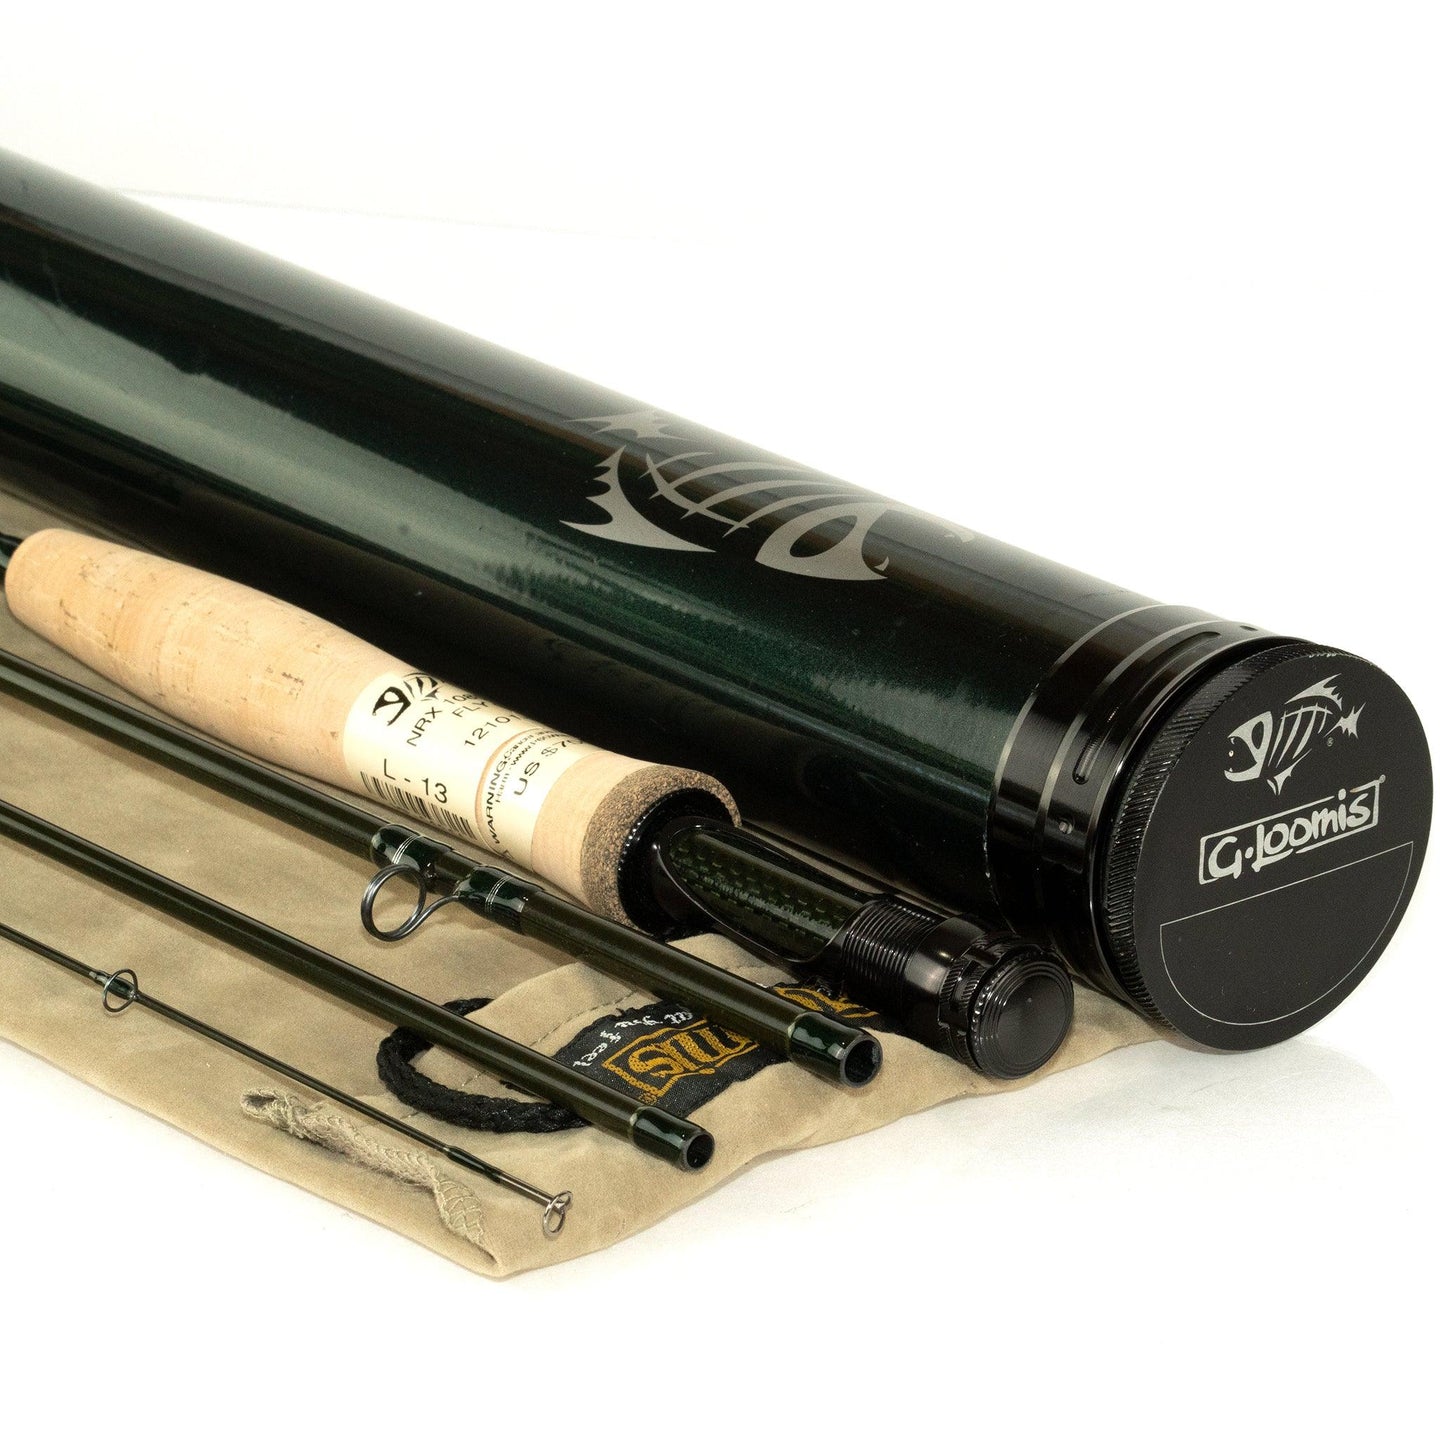 GLoomis NRX 590-4 Fly Rod - 5wt 9ft 0in 4pc - Outfishers